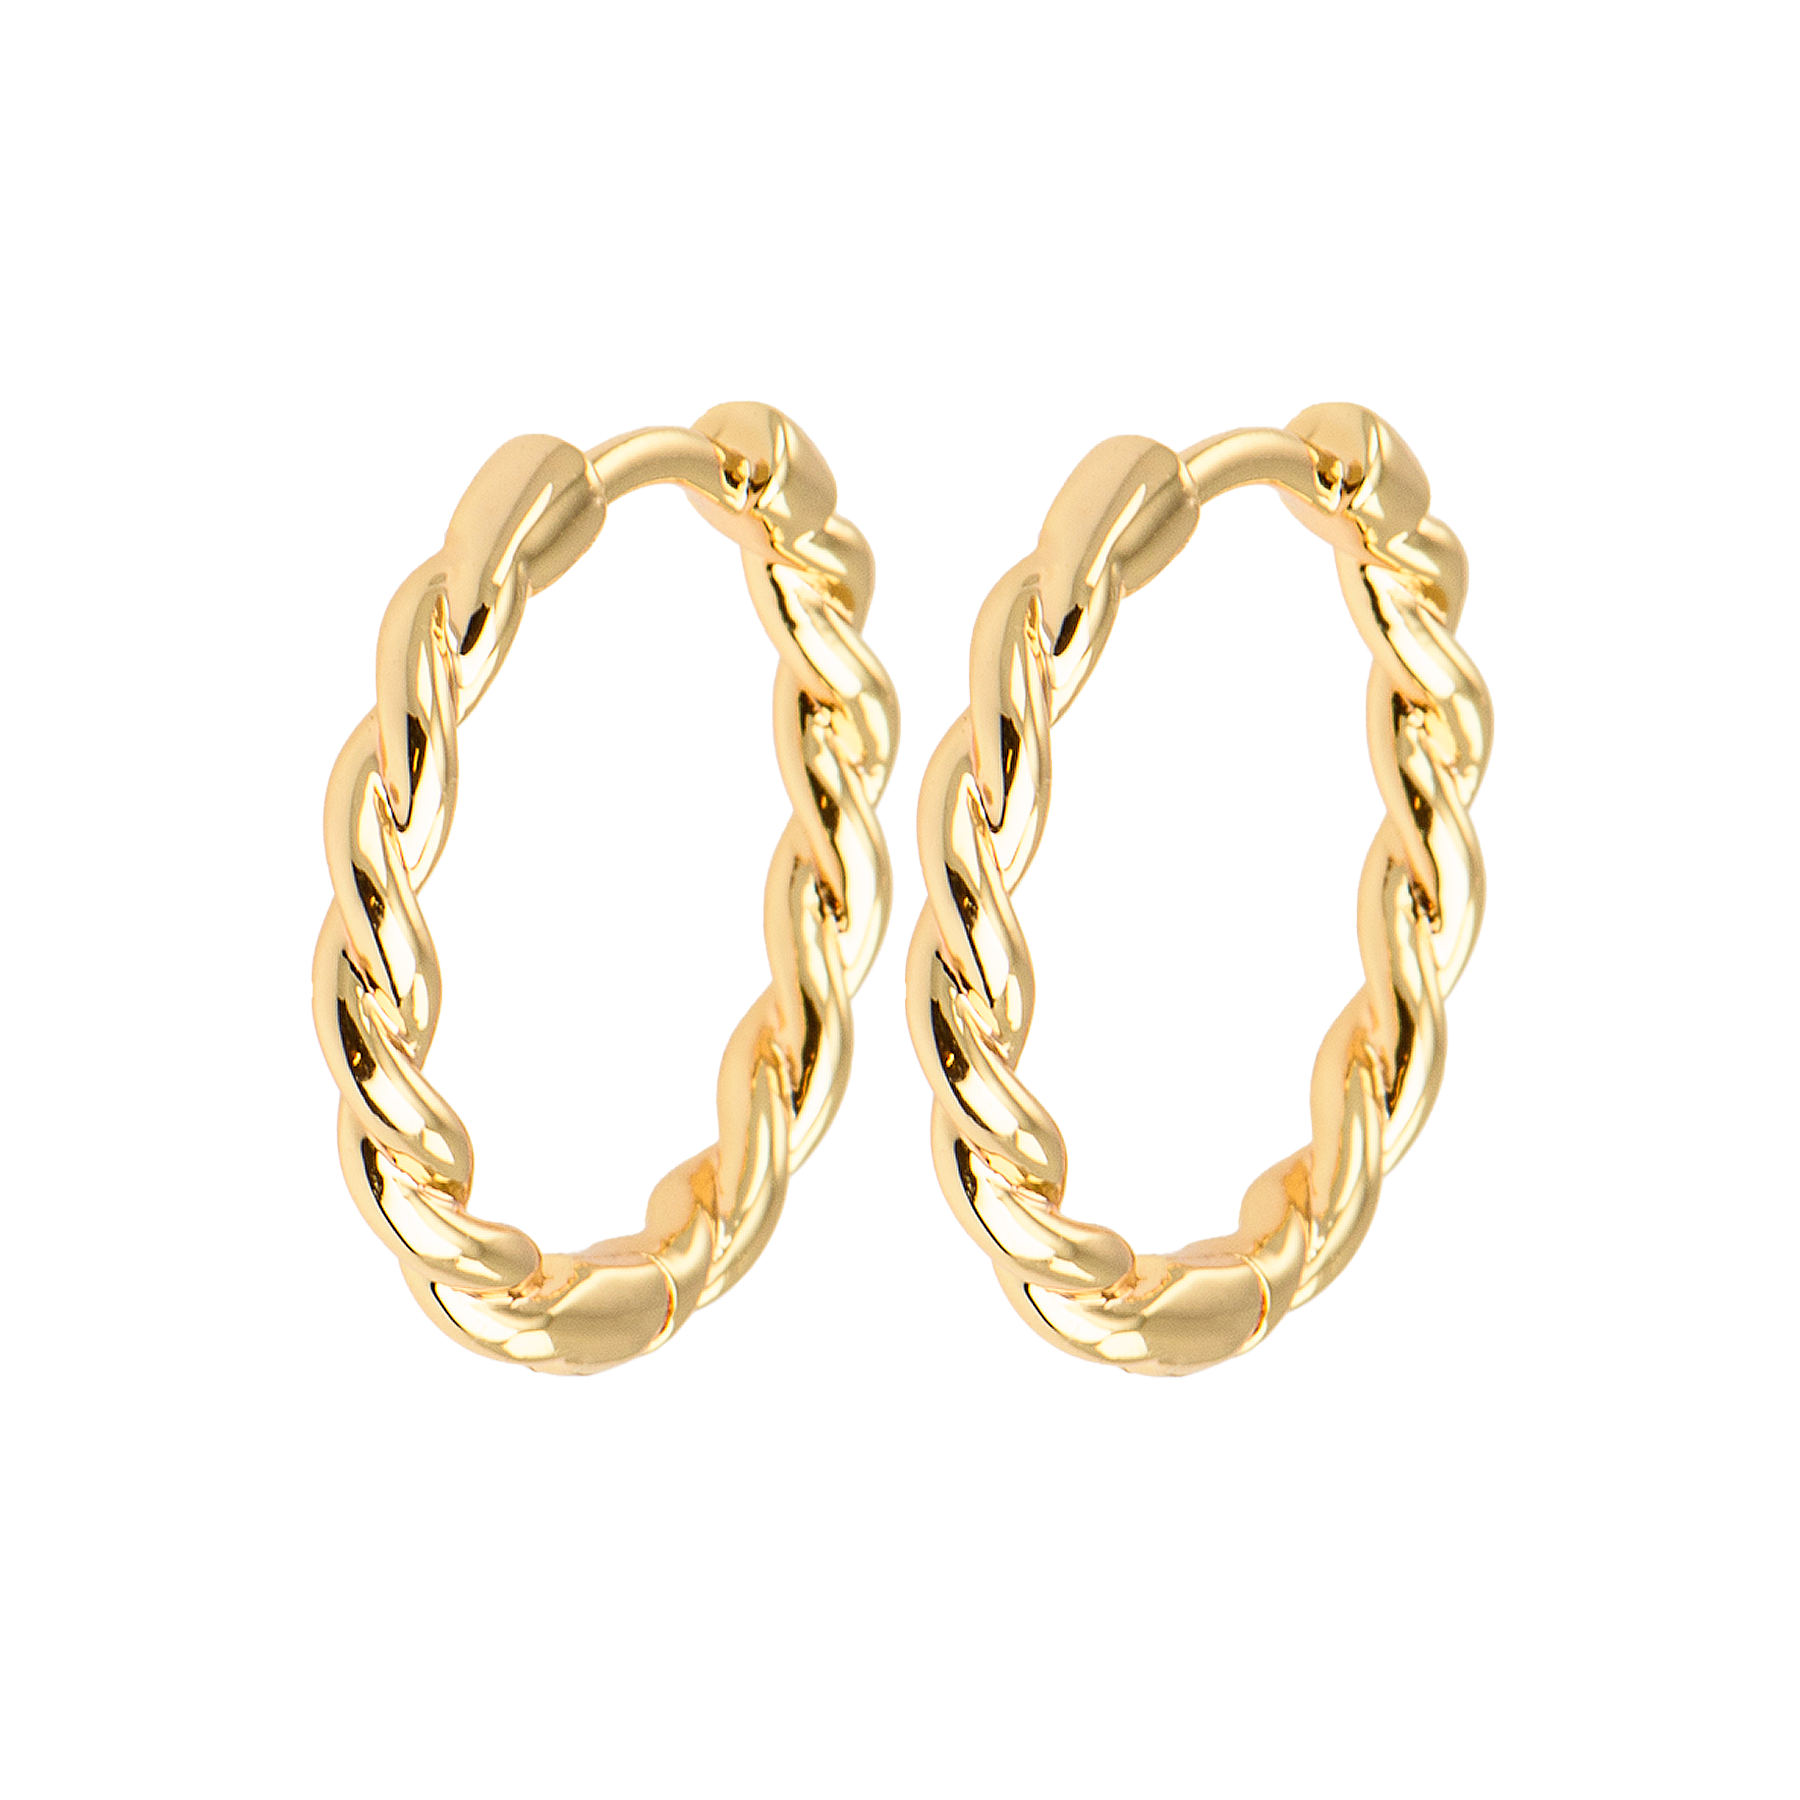 Image of Twisted hoops from Emilia by Bon Dep